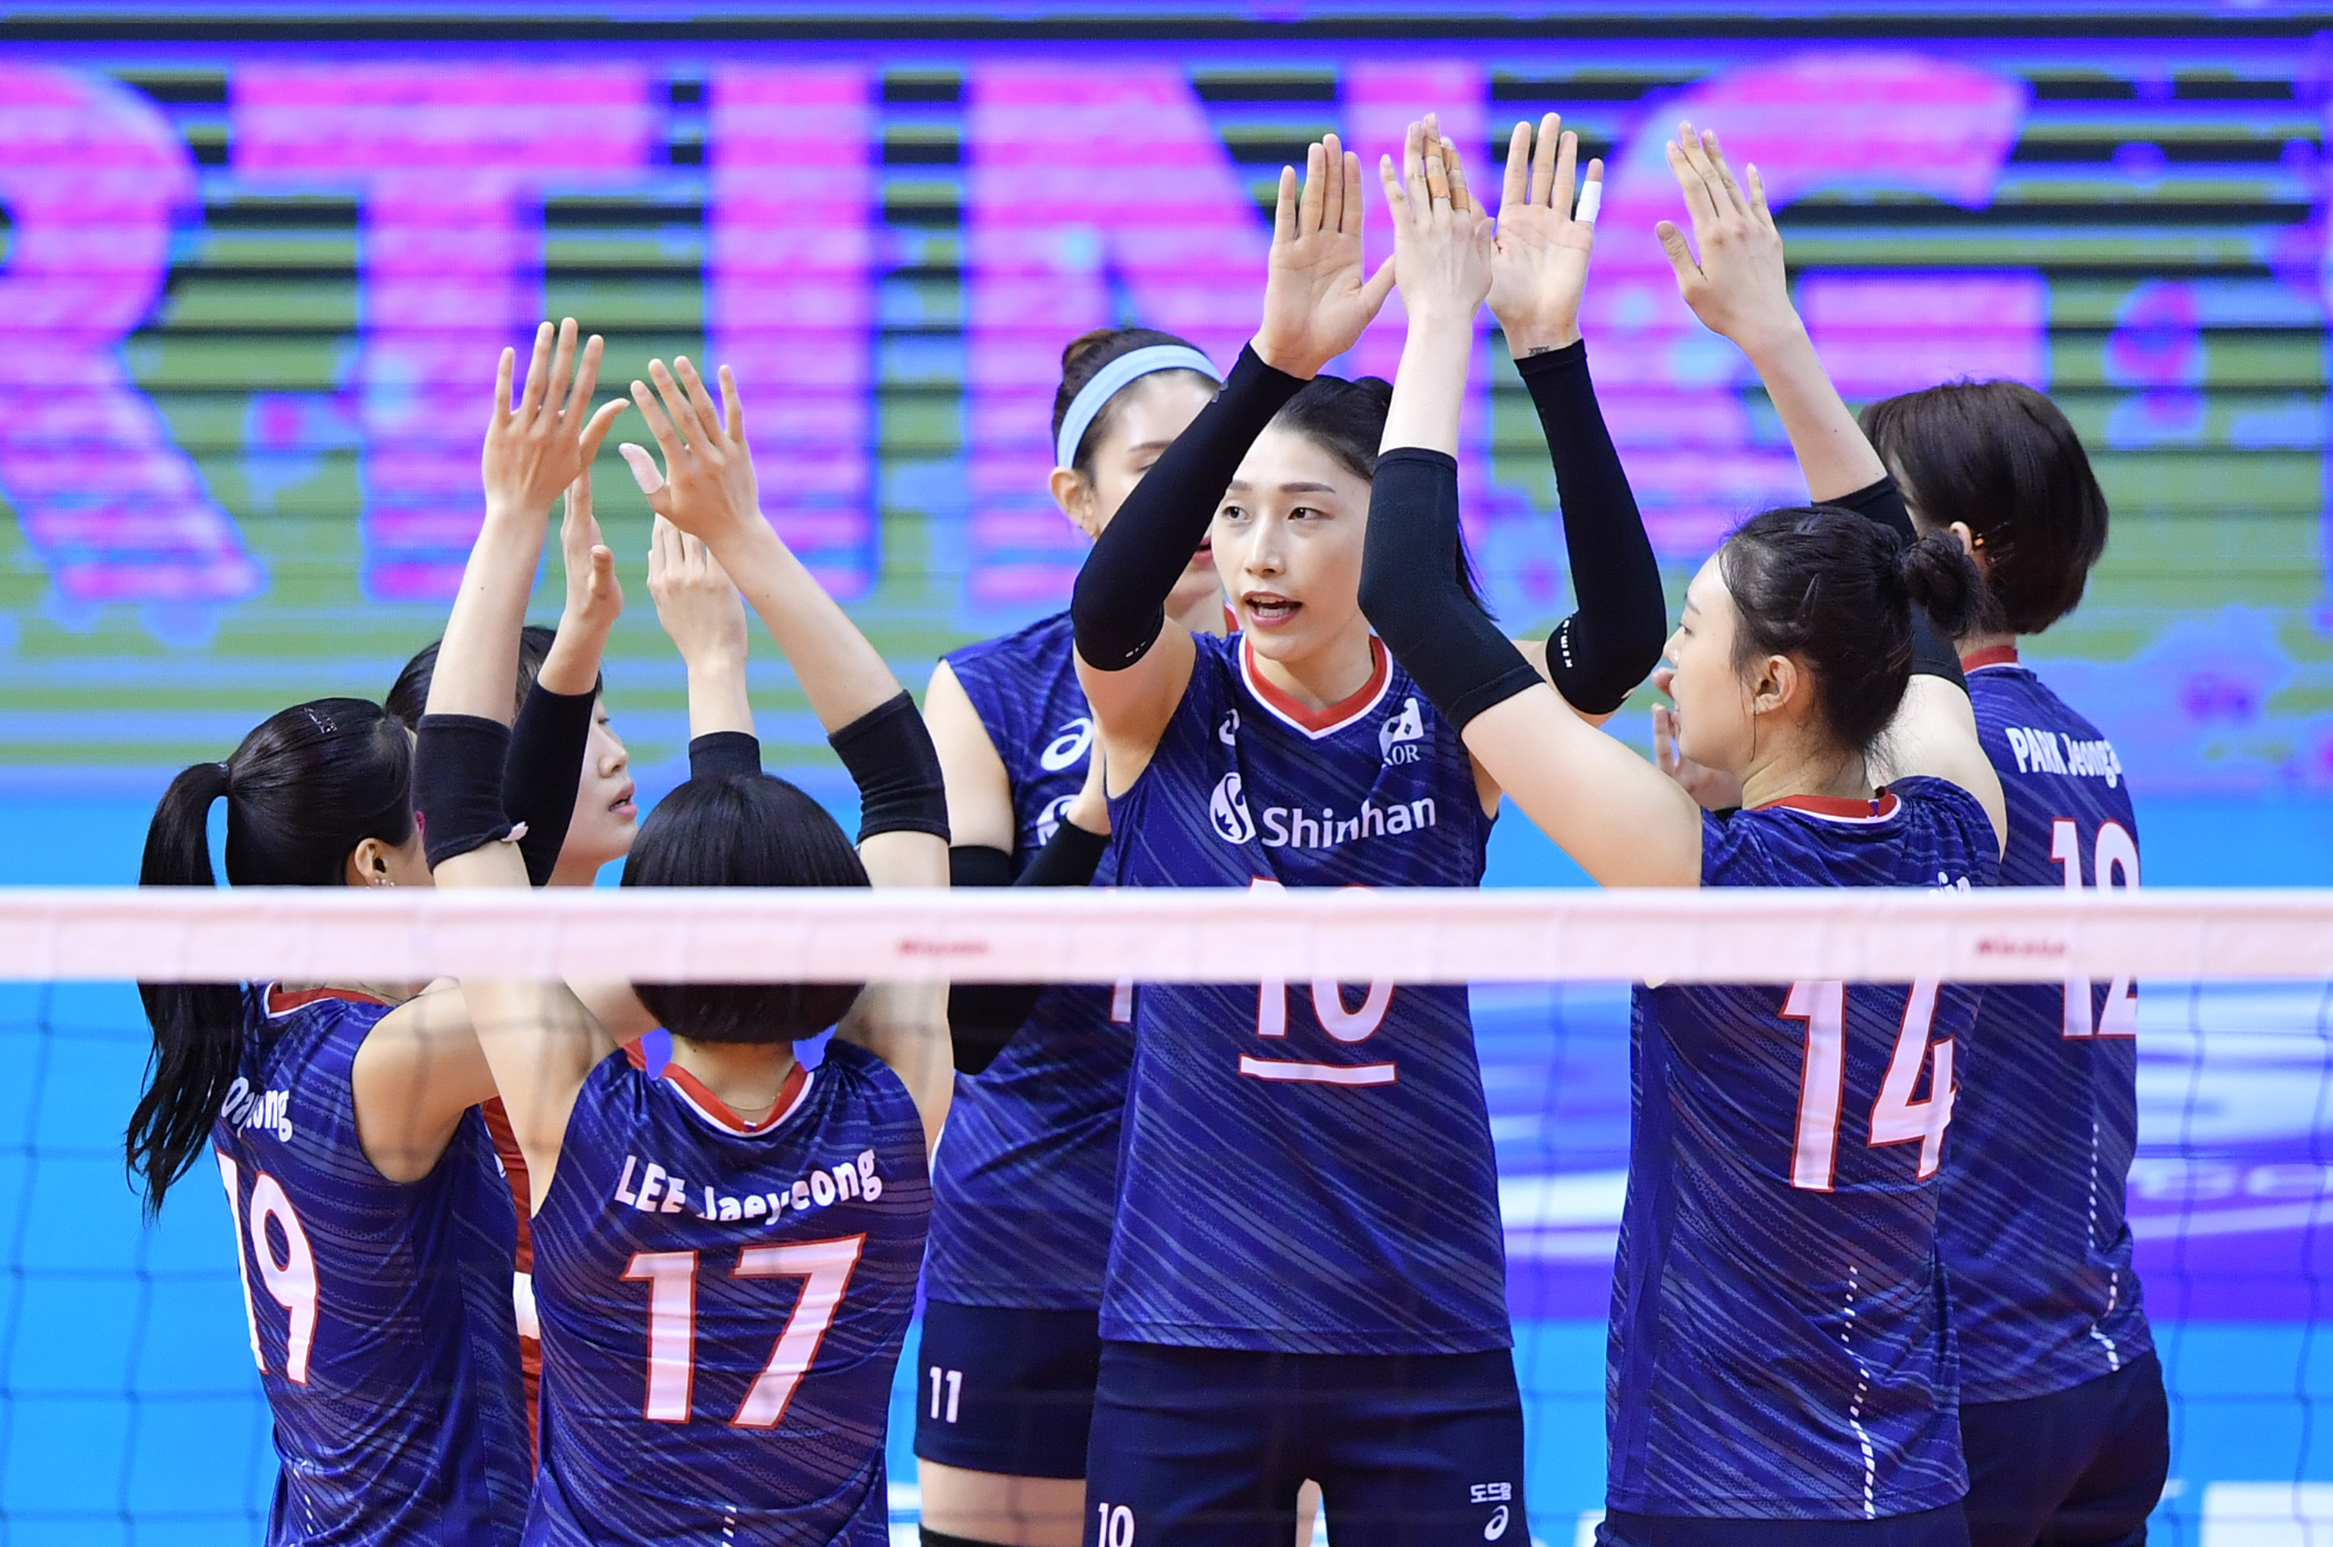 KOREA SWEEP IRAN TO SECURE A SEMIFINAL SPOT AT AVC WOMEN’S TOKYO VOLLEYBALL QUALIFICATION